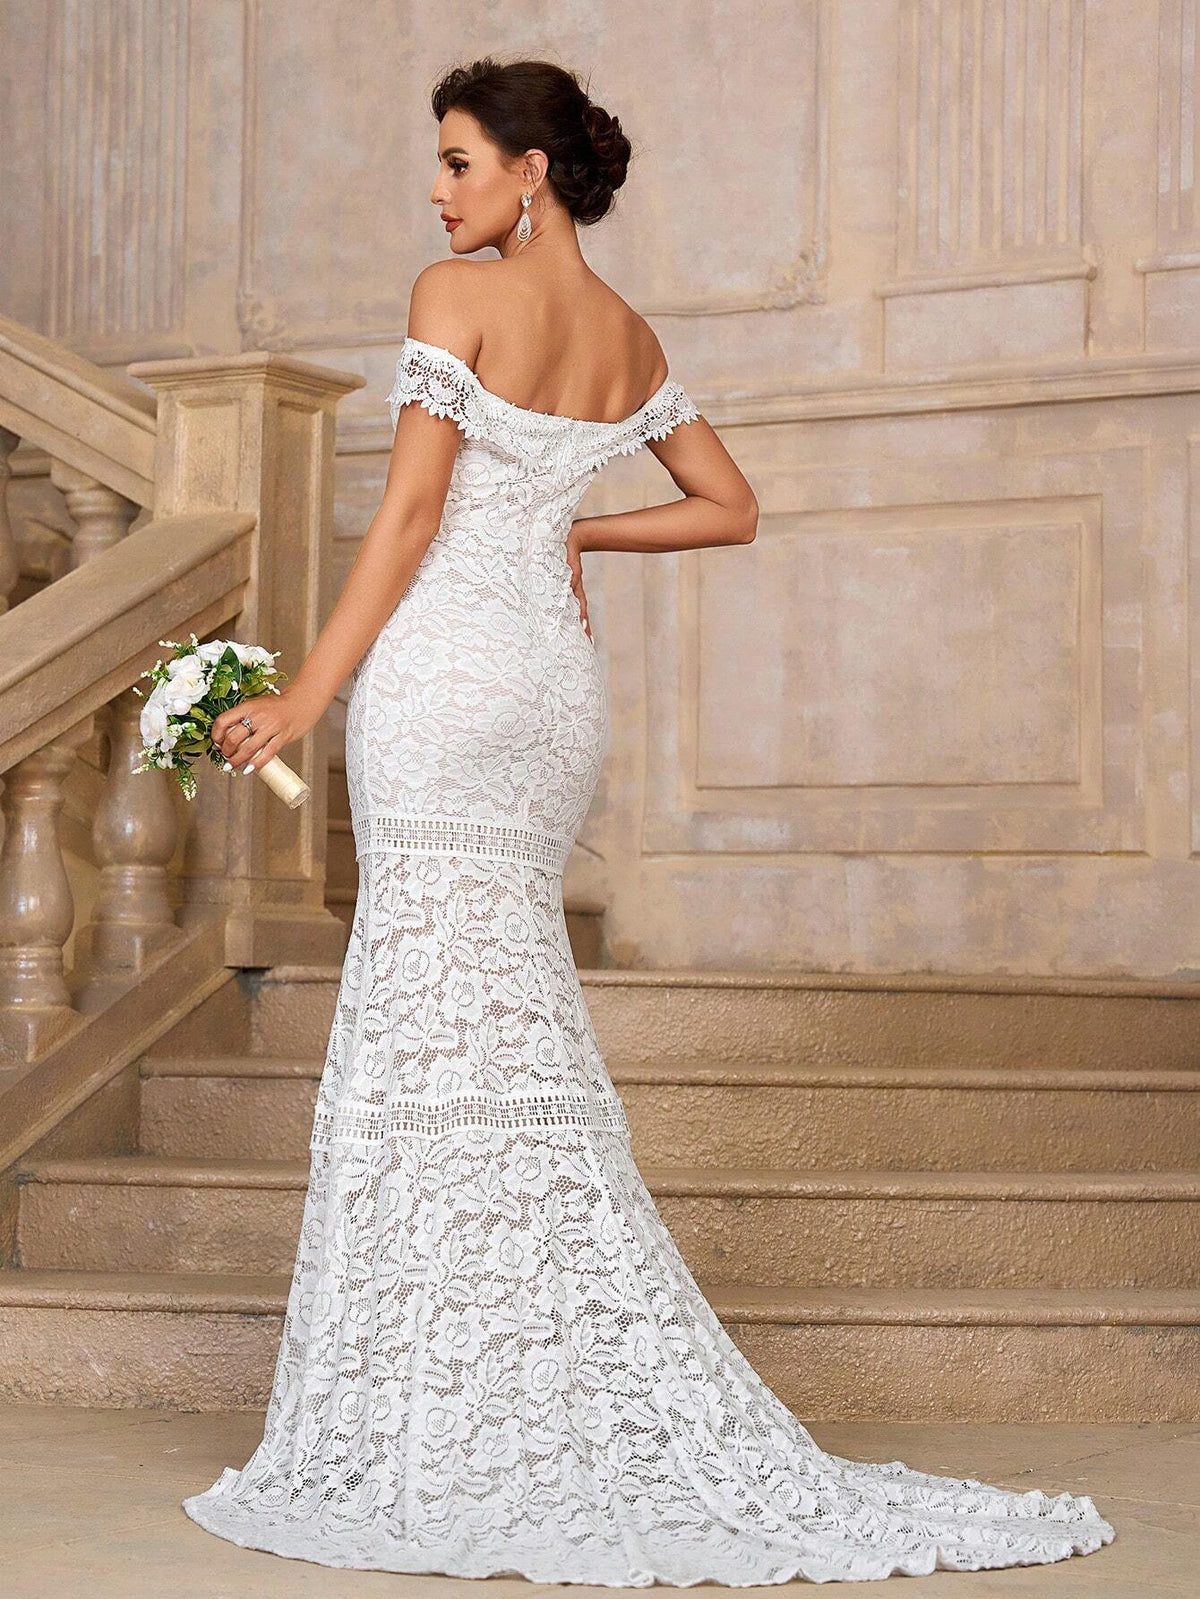 Elegant, Gorgeous And Romantic White One-Shoulder Off-Shoulder Mermaid Tail Stunning Stretch Lace Splicing Embroidered Lace Suitable For Weddings Holiday Parties Prom Holiday Long Train Floor-Length Wedding Dress